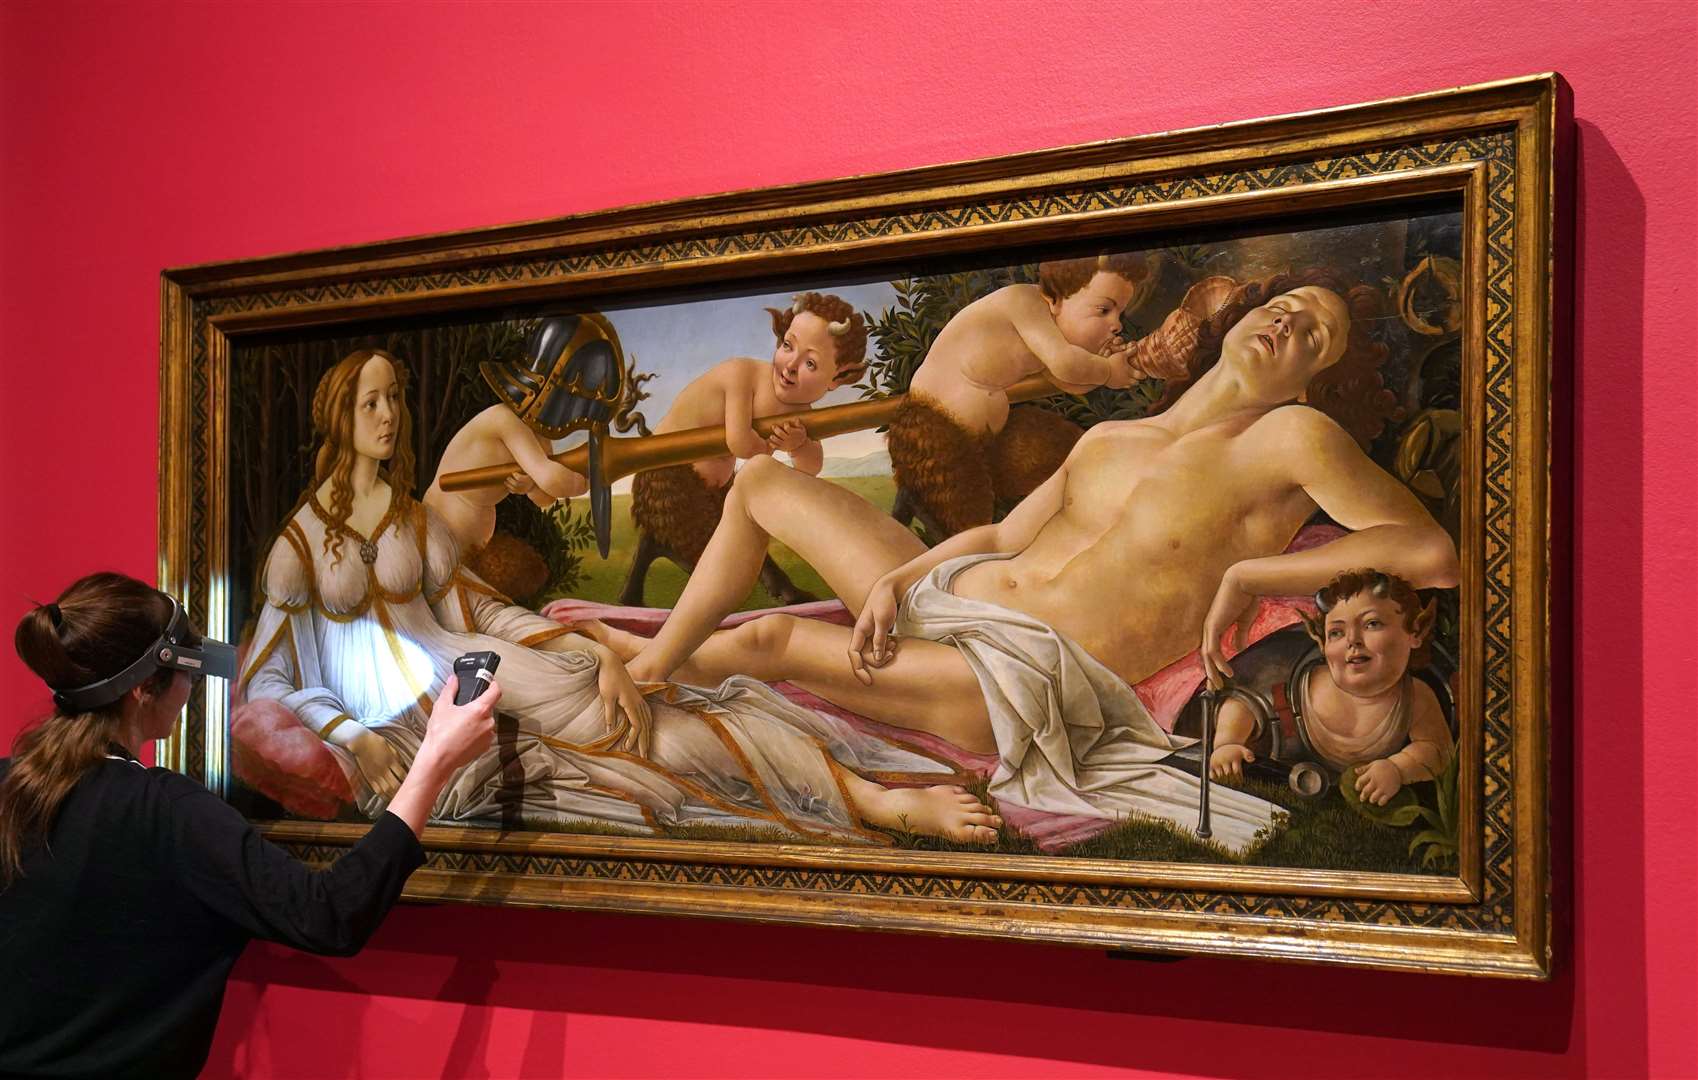 The painting Venus and Mars by Italian Renaissance artist Sandro Botticelli has left the National Gallery in London to go on loan at Cambridge’s Fitzwilliam Museum (Joe Giddens/ PA)